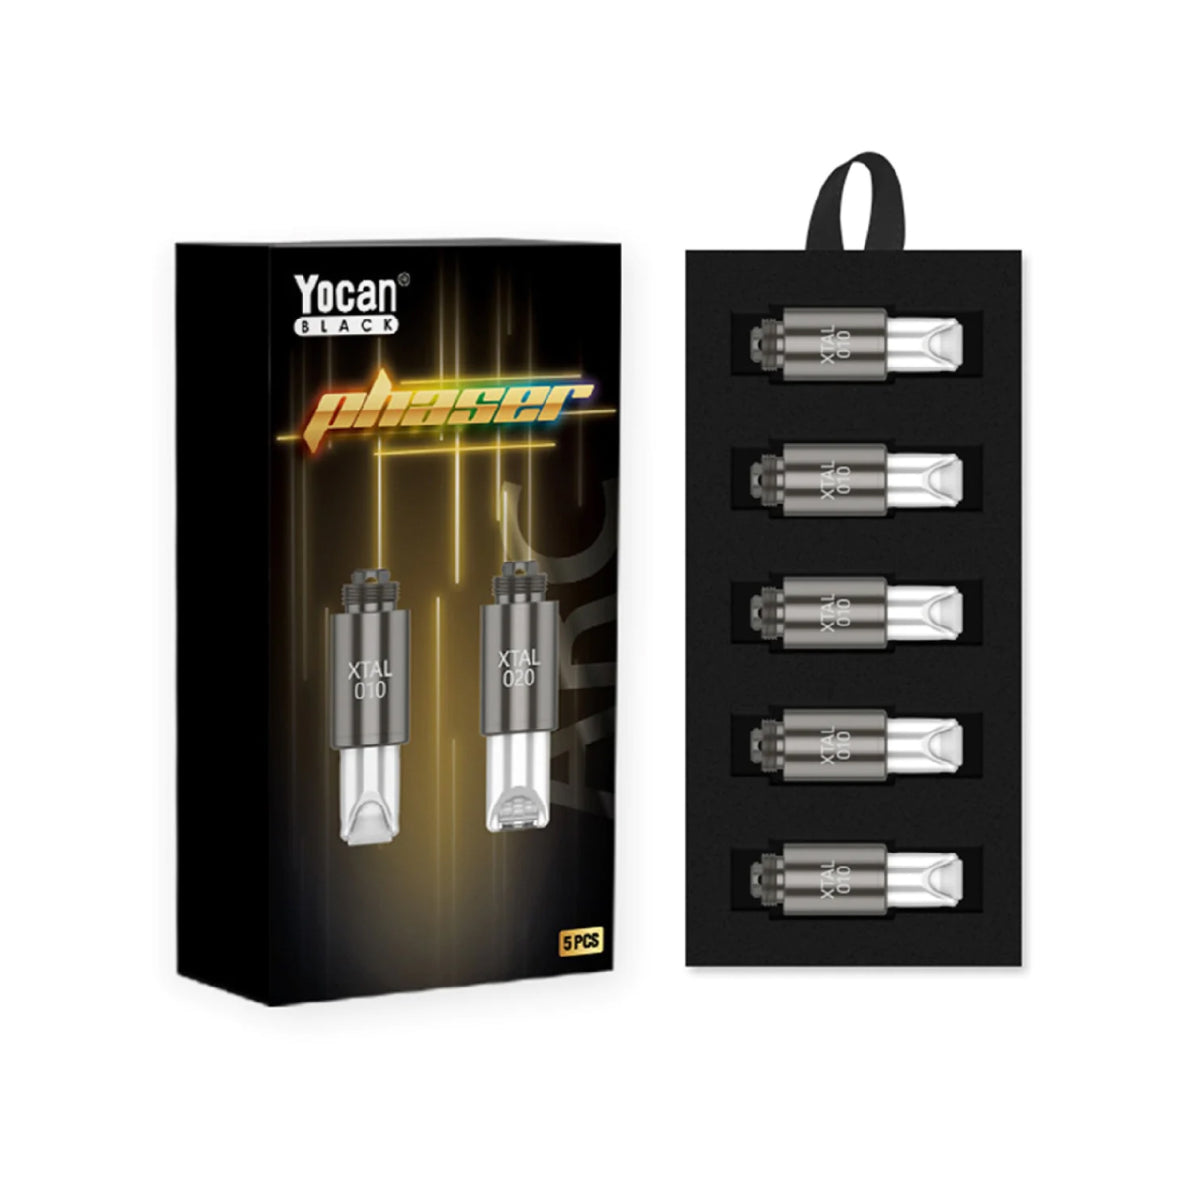 Yocan Black Phaser Arc Replacement XTAL Coil - 5 Pack 010